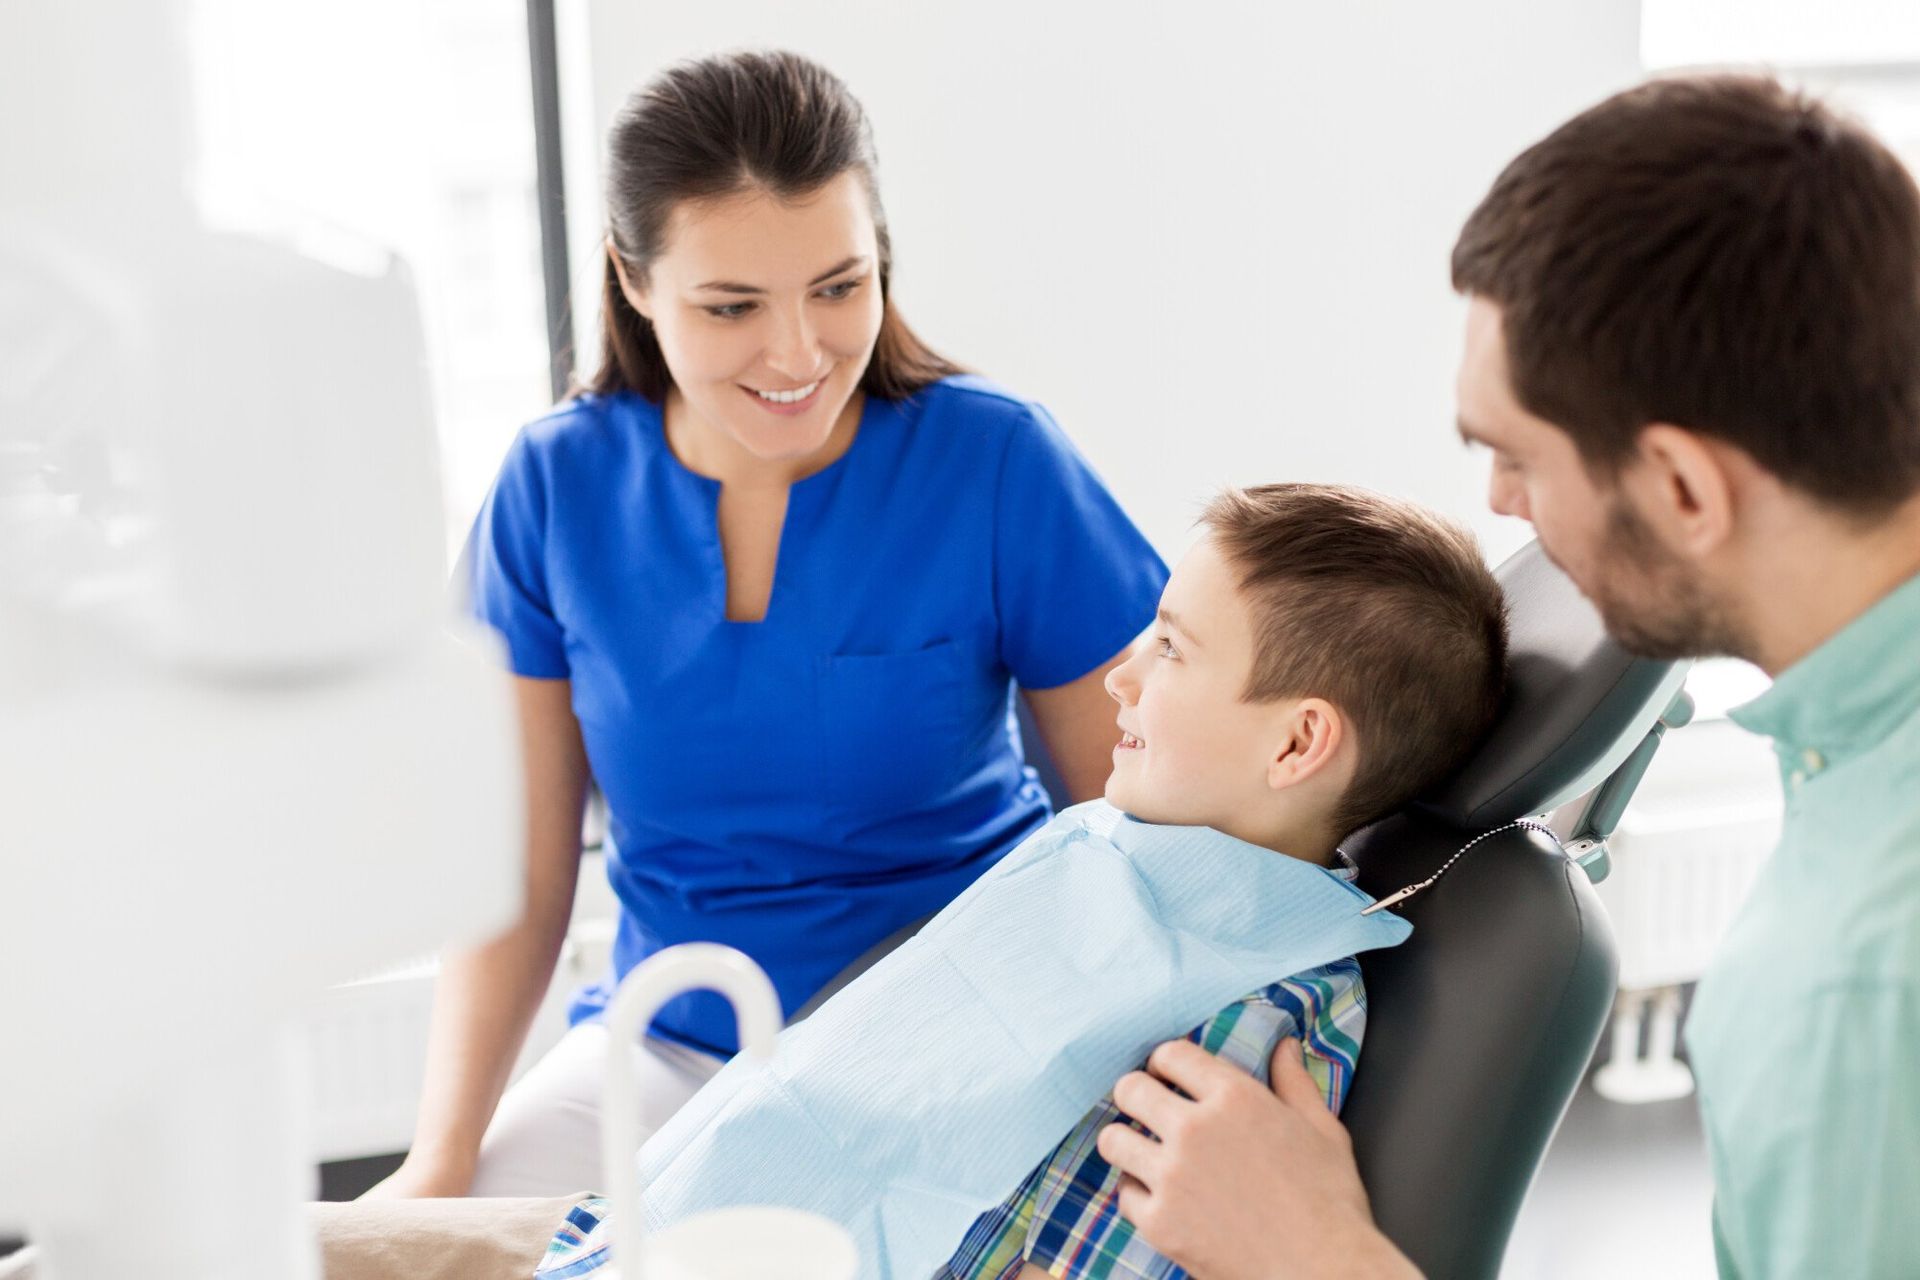 a young boy is sitting in a dental chair with the dental assistant